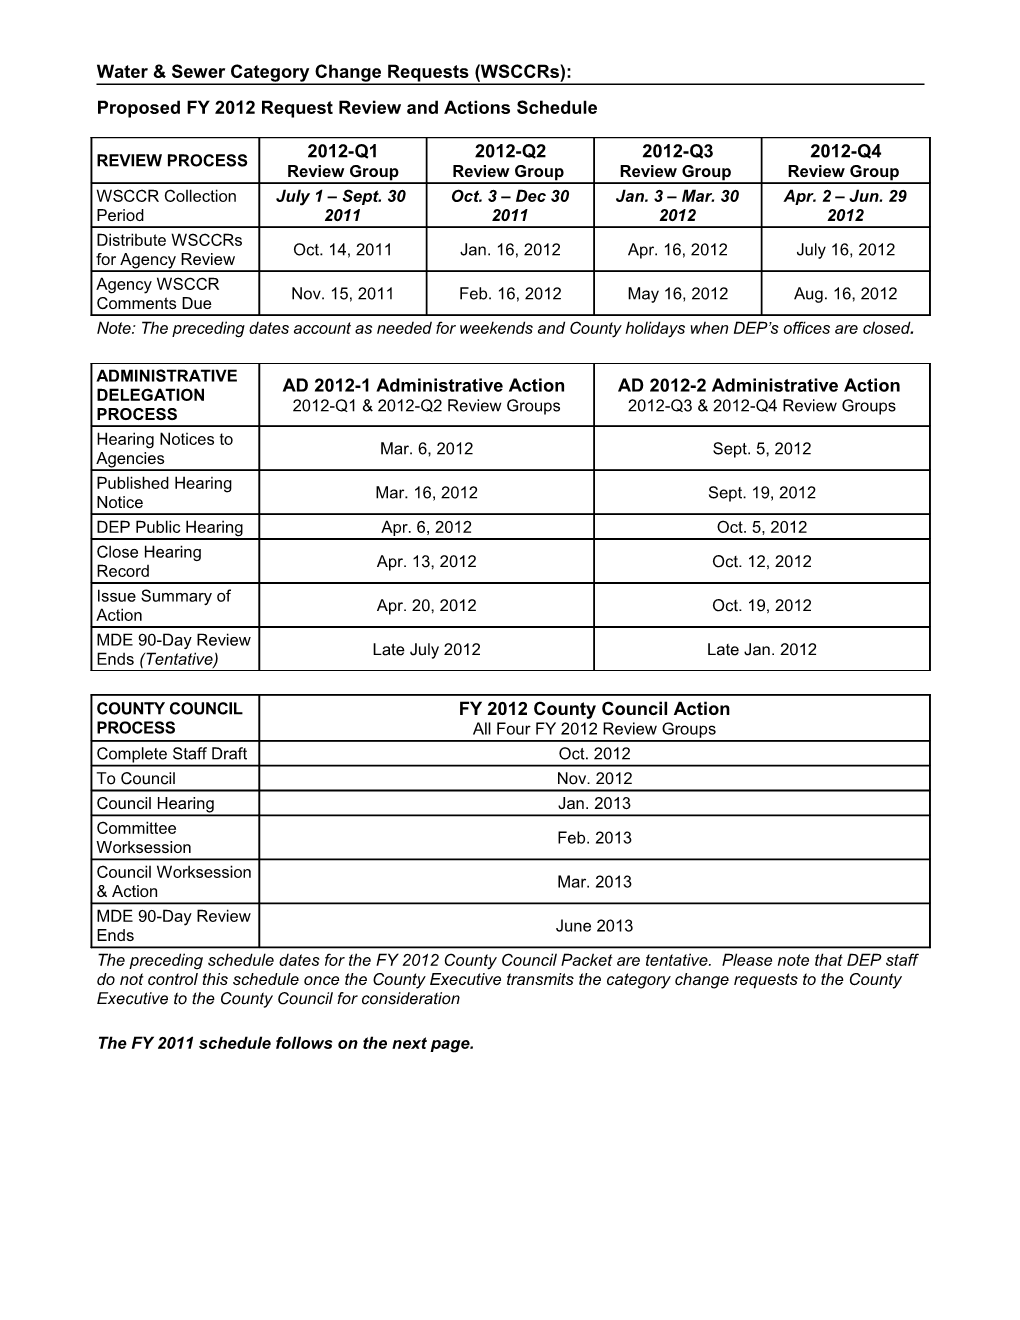 Proposed FY 2011 CCR Review and Actions Schedule